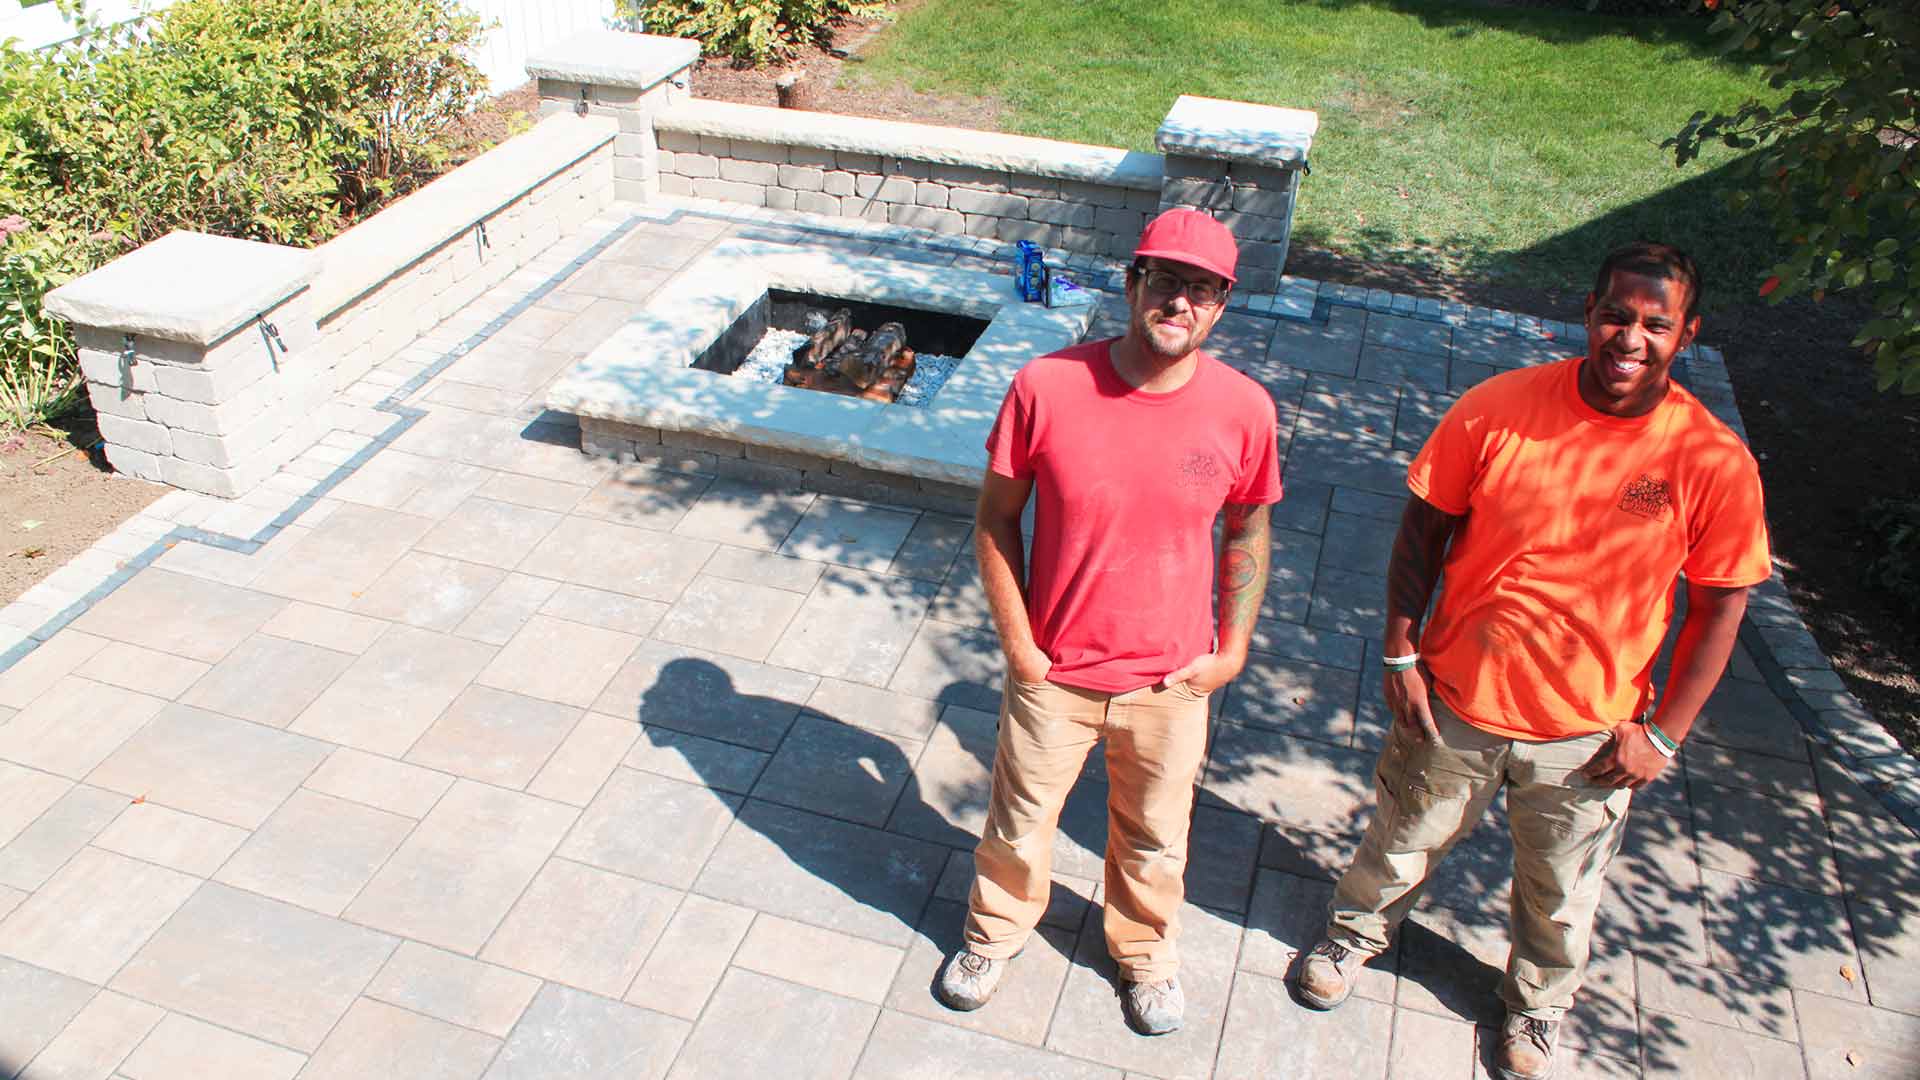 We hire team members to work on the various landscaping and hardscaping projecs